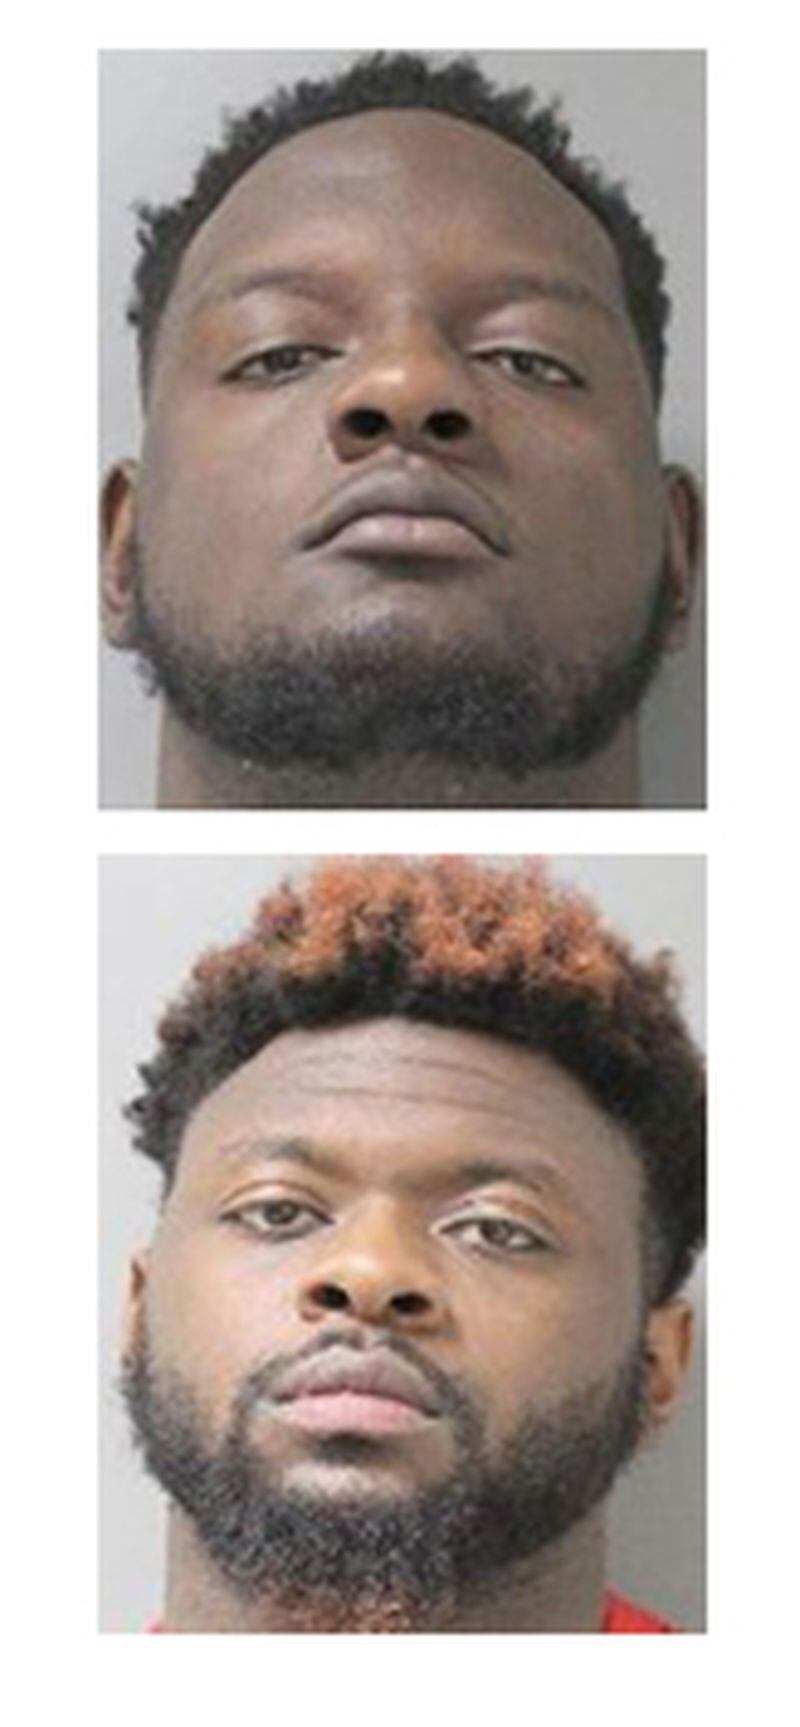 Alabama offensive lineman Cam Robinson (top) and reserve defensive back Laurence "Hootie" Jones will not face prosecution on drug and weapons charges.